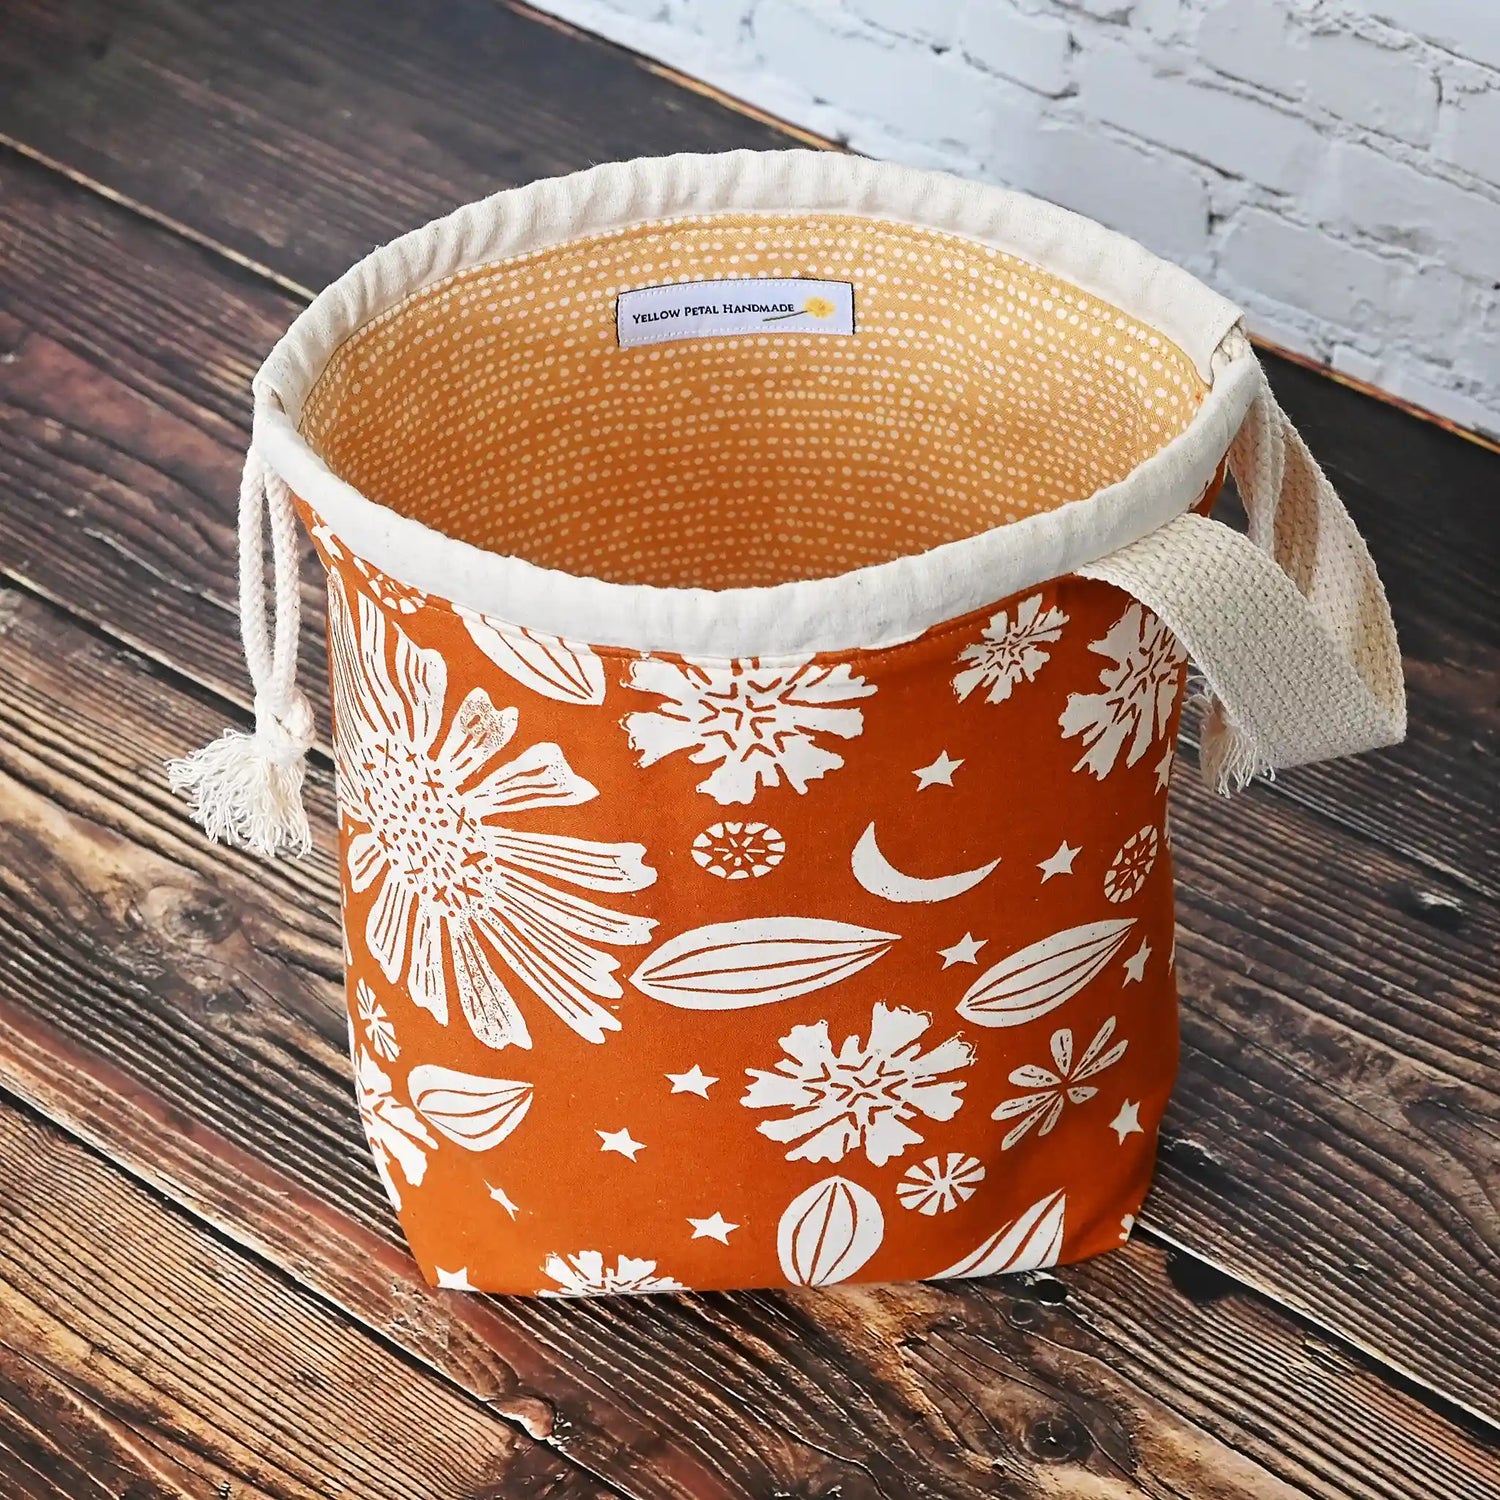 Beautiful drawstring project bag with handle in a burnt orange floral and star fabric and lined in a fun gold dotty cotton.  Handmade in Nova Scotia Canada by Yellow Petal Handmade.